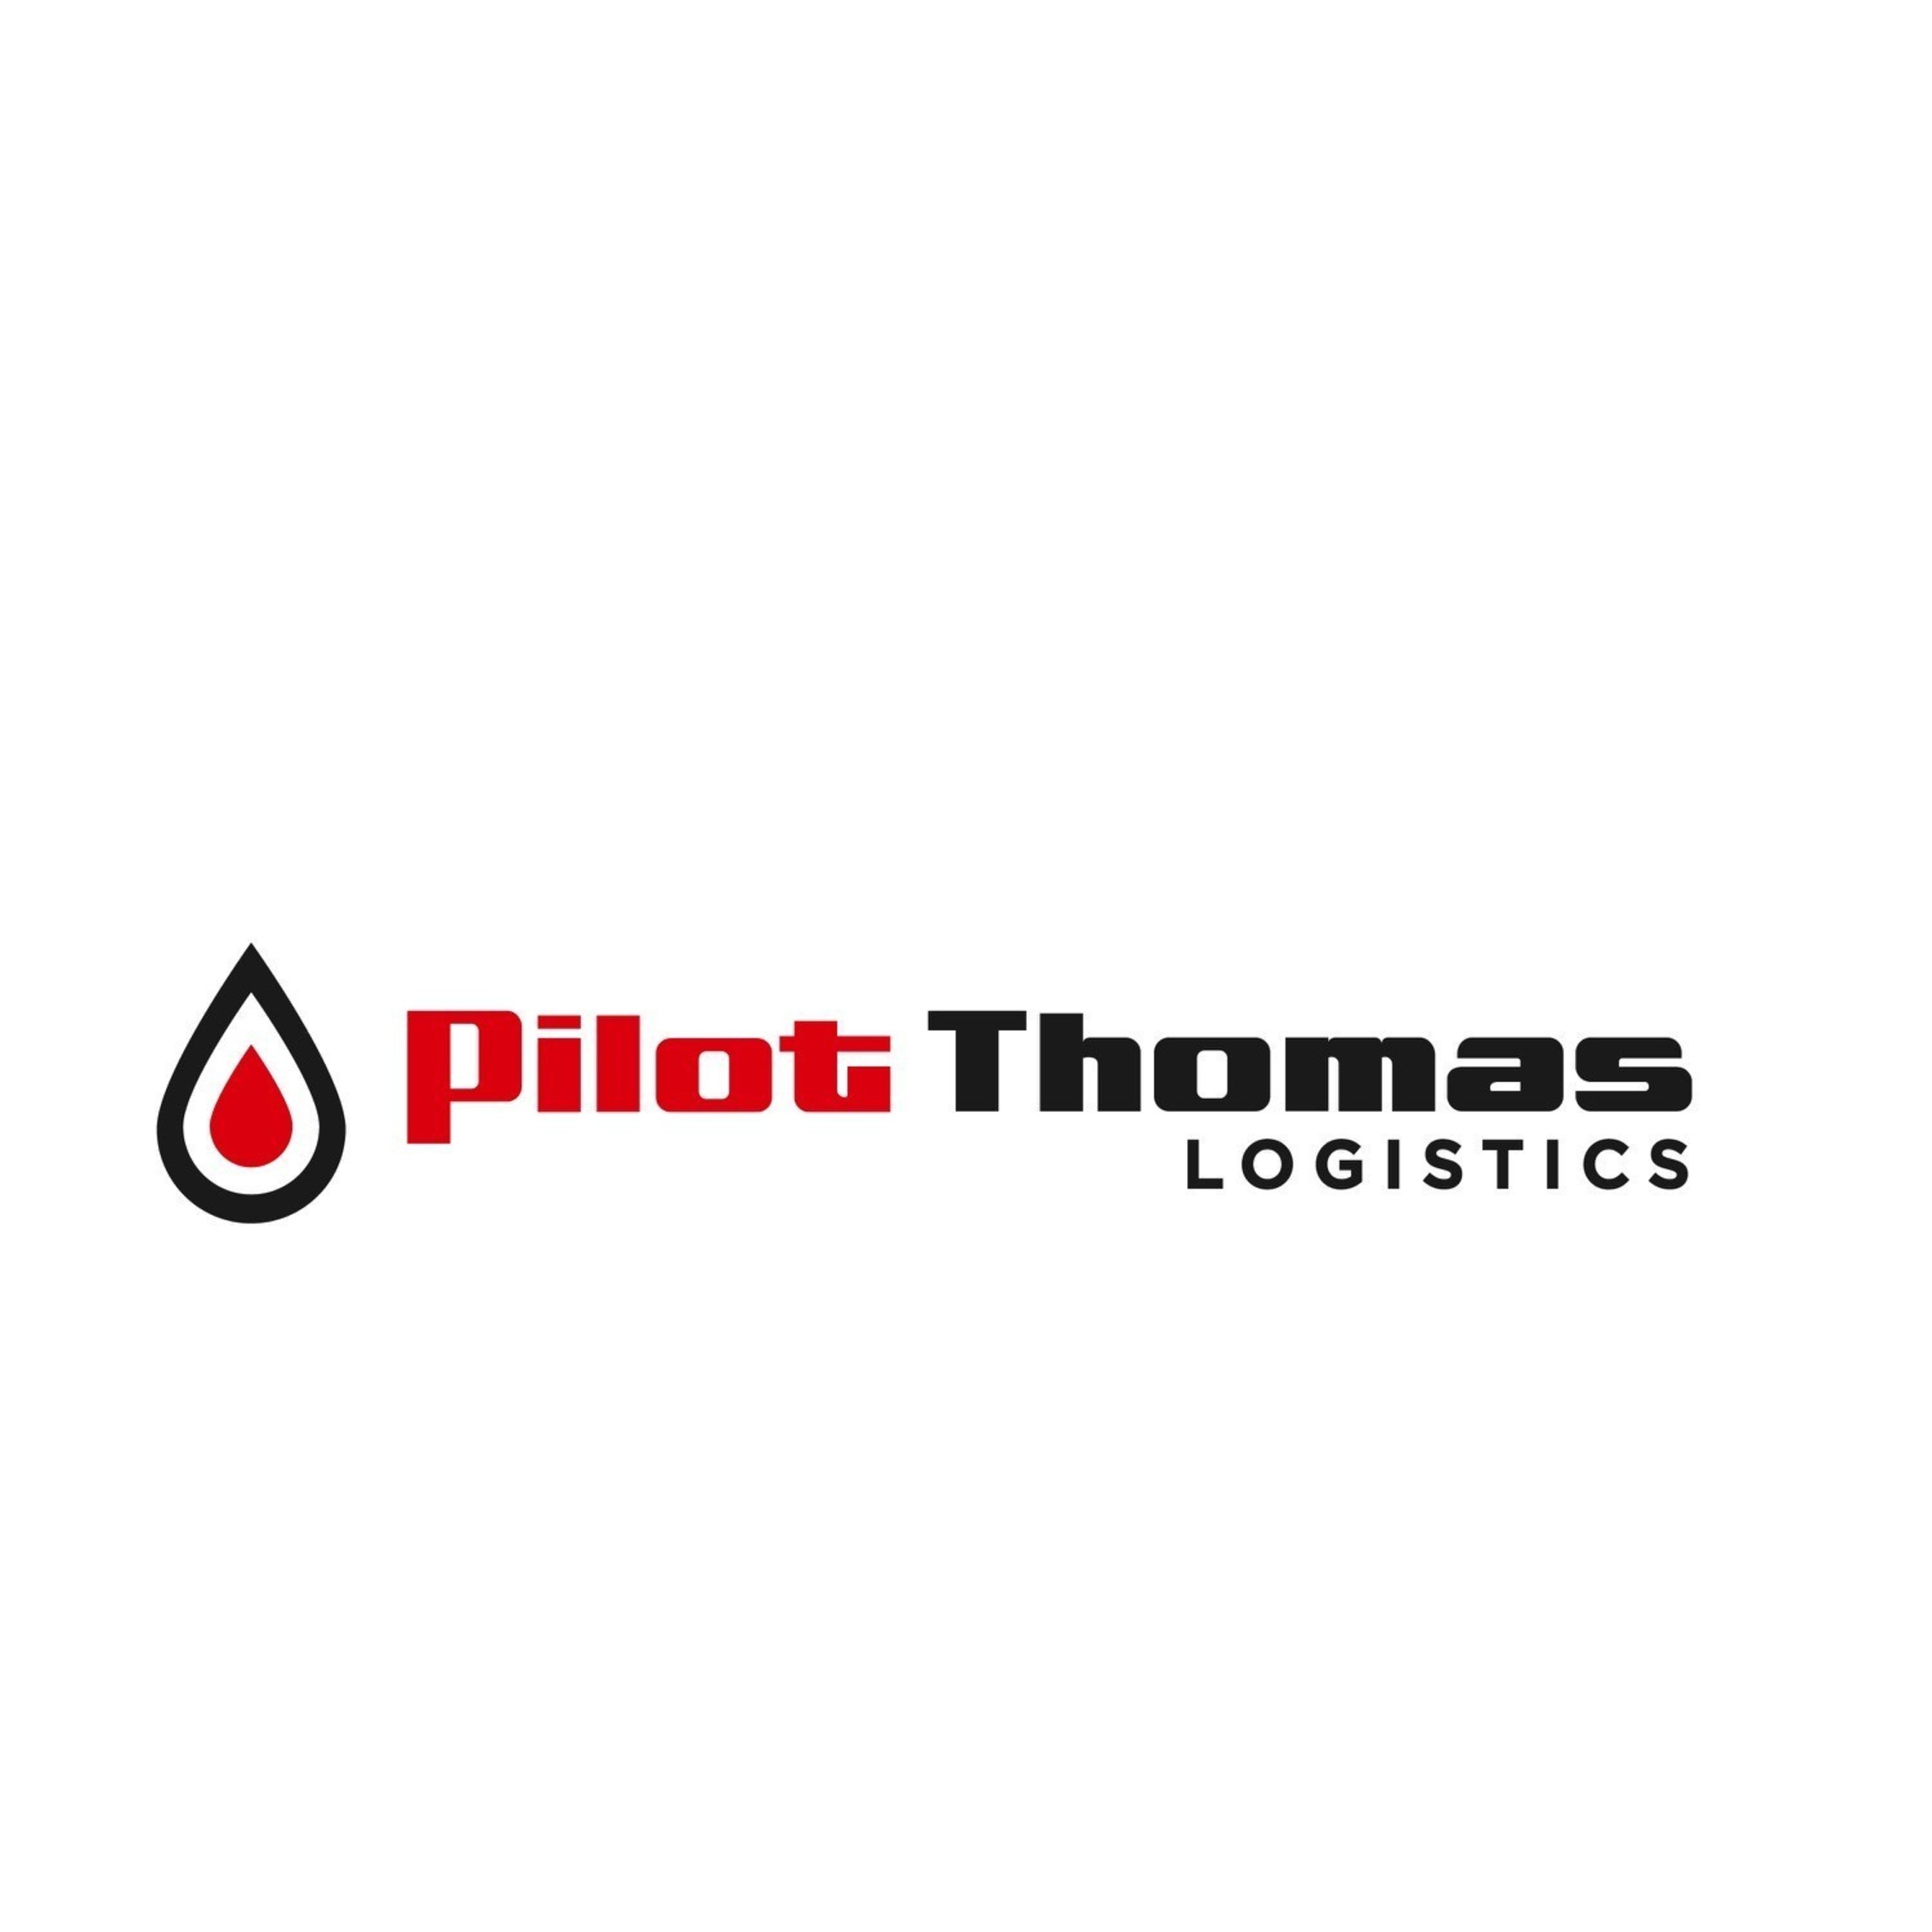 Pilot Logistics Services and Thomas Petroleum announce the completion of their merger to form the premier provider of fuel, lubricants and chemical solutions to the North American energy, mining and marine industries. The combined organization will operate as Pilot Thomas Logistics, headquartered in Fort Worth, Texas.